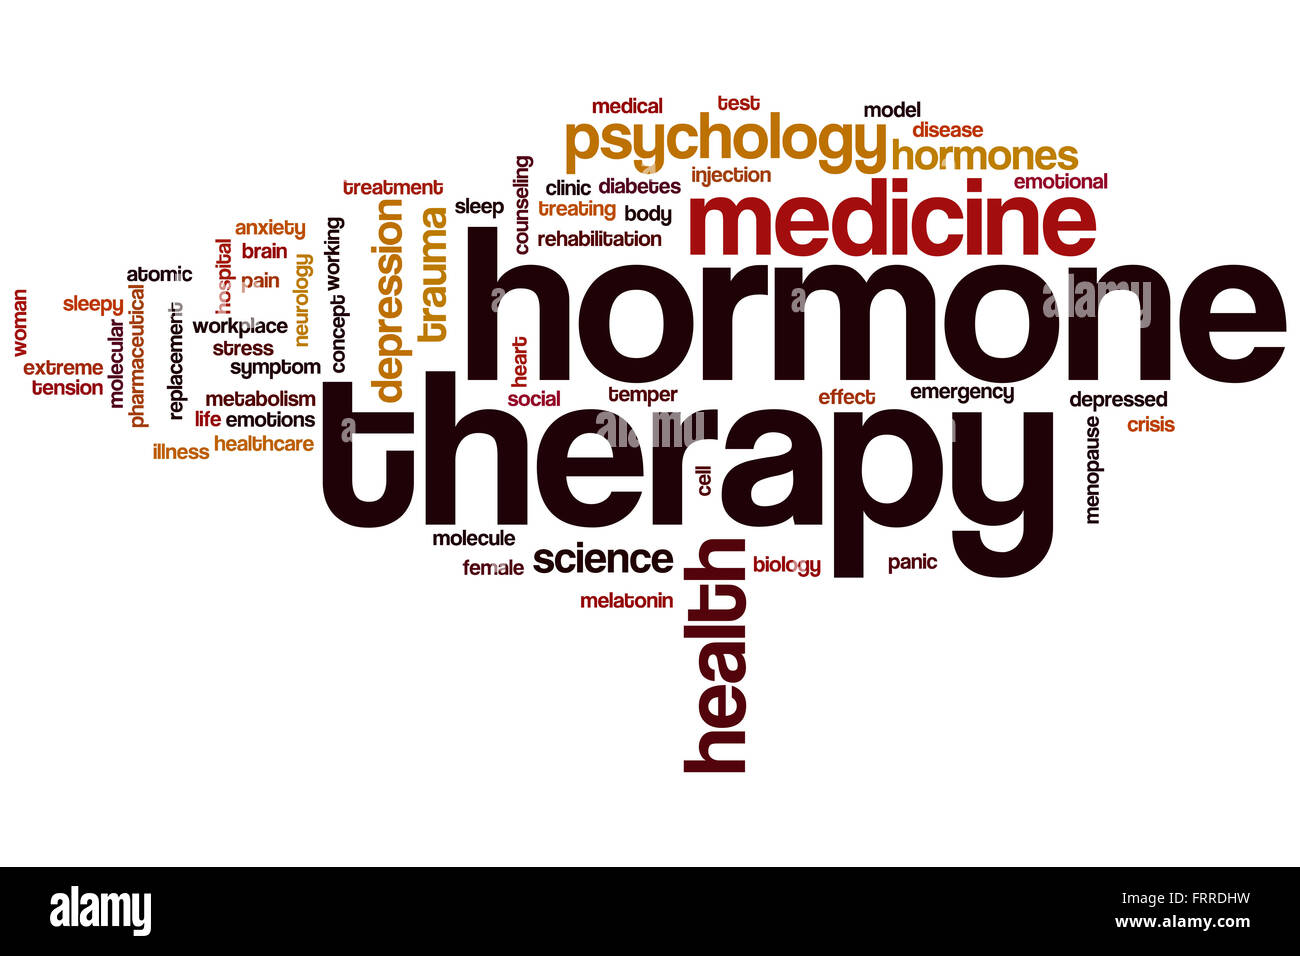 Hormone therapy word cloud concept Stock Photo